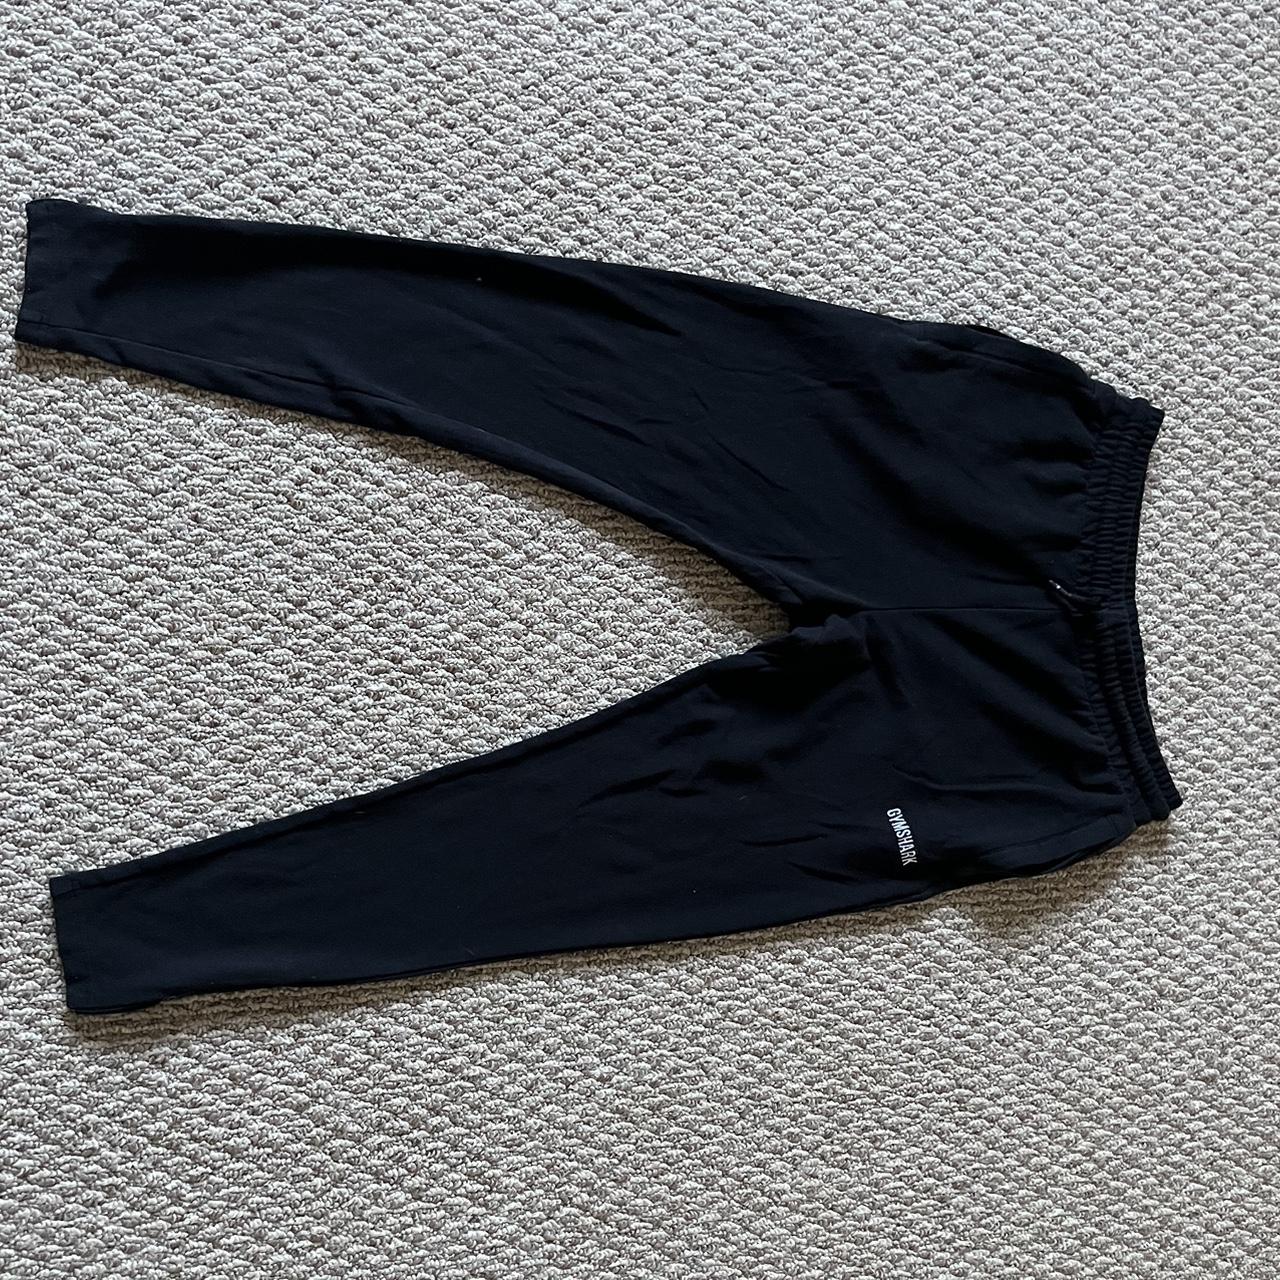 Release joggers from Gymshark. Cream color. Small - Depop